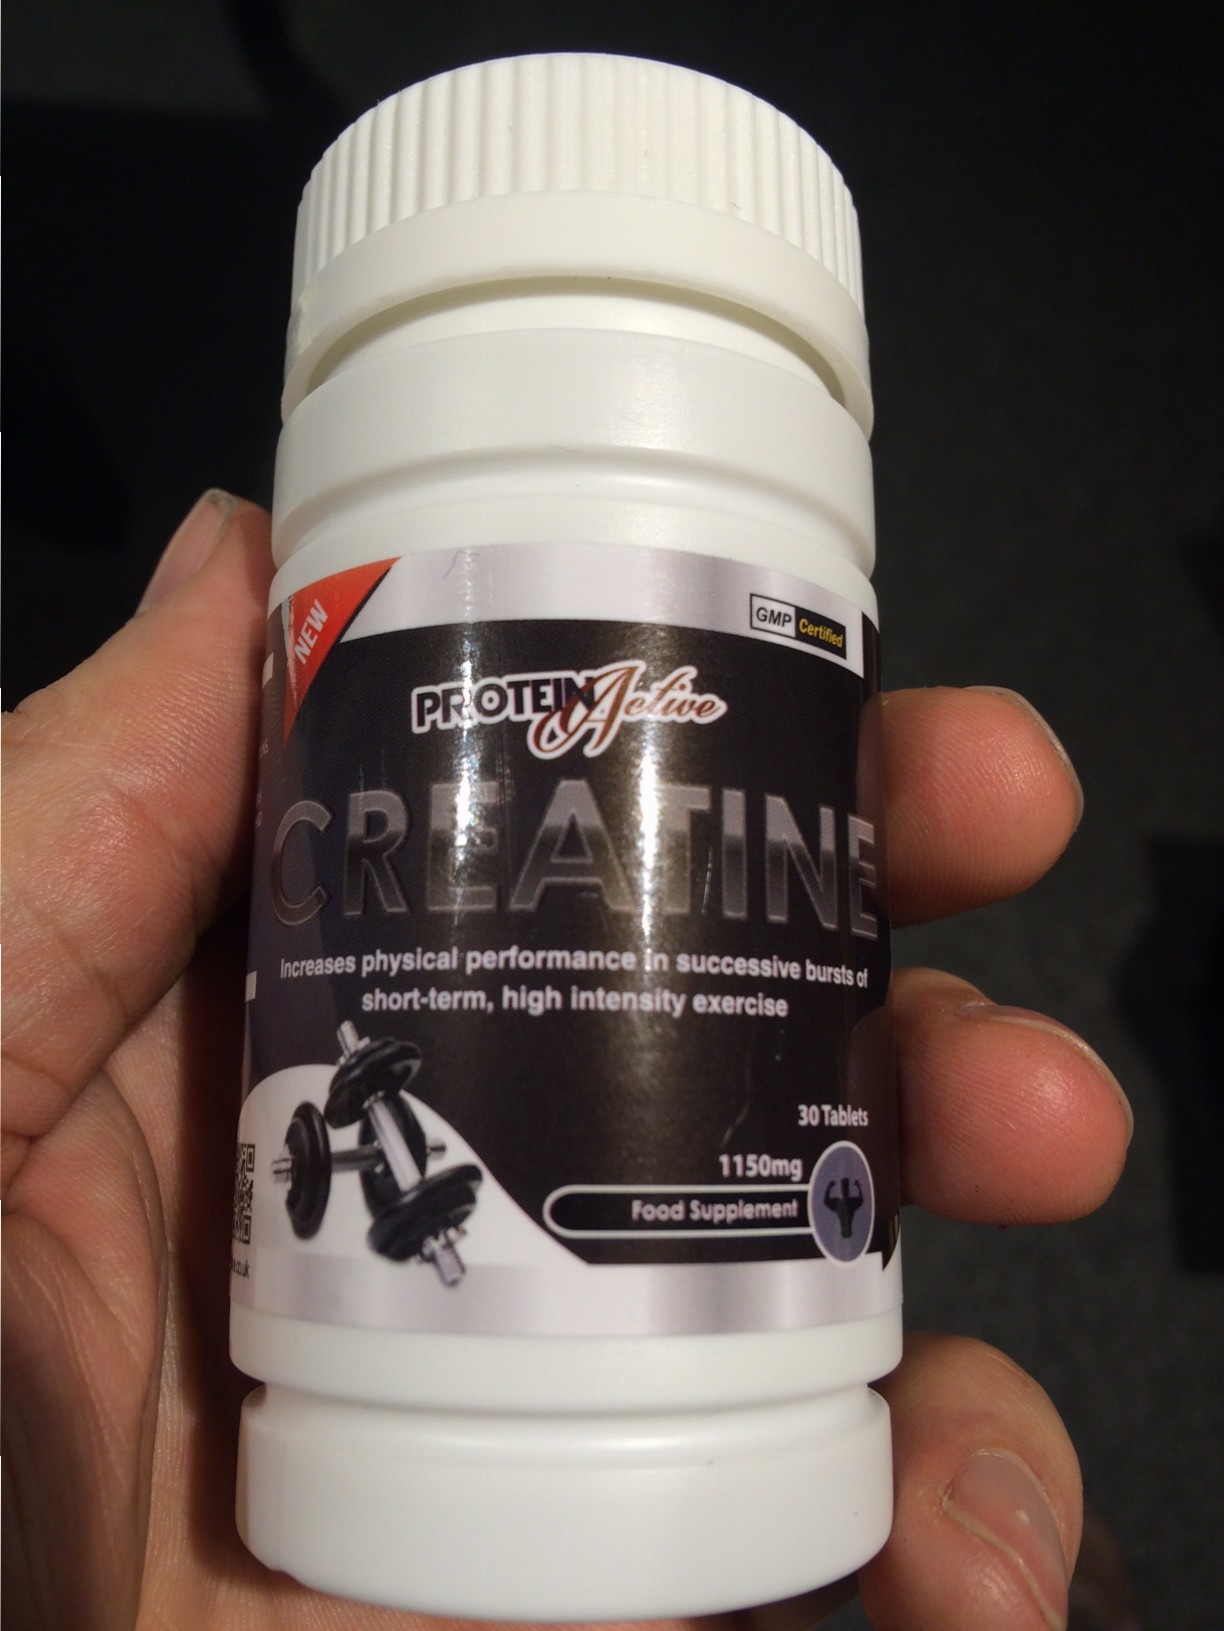 PROTEIN ACTIVE CREATINE TABLETS